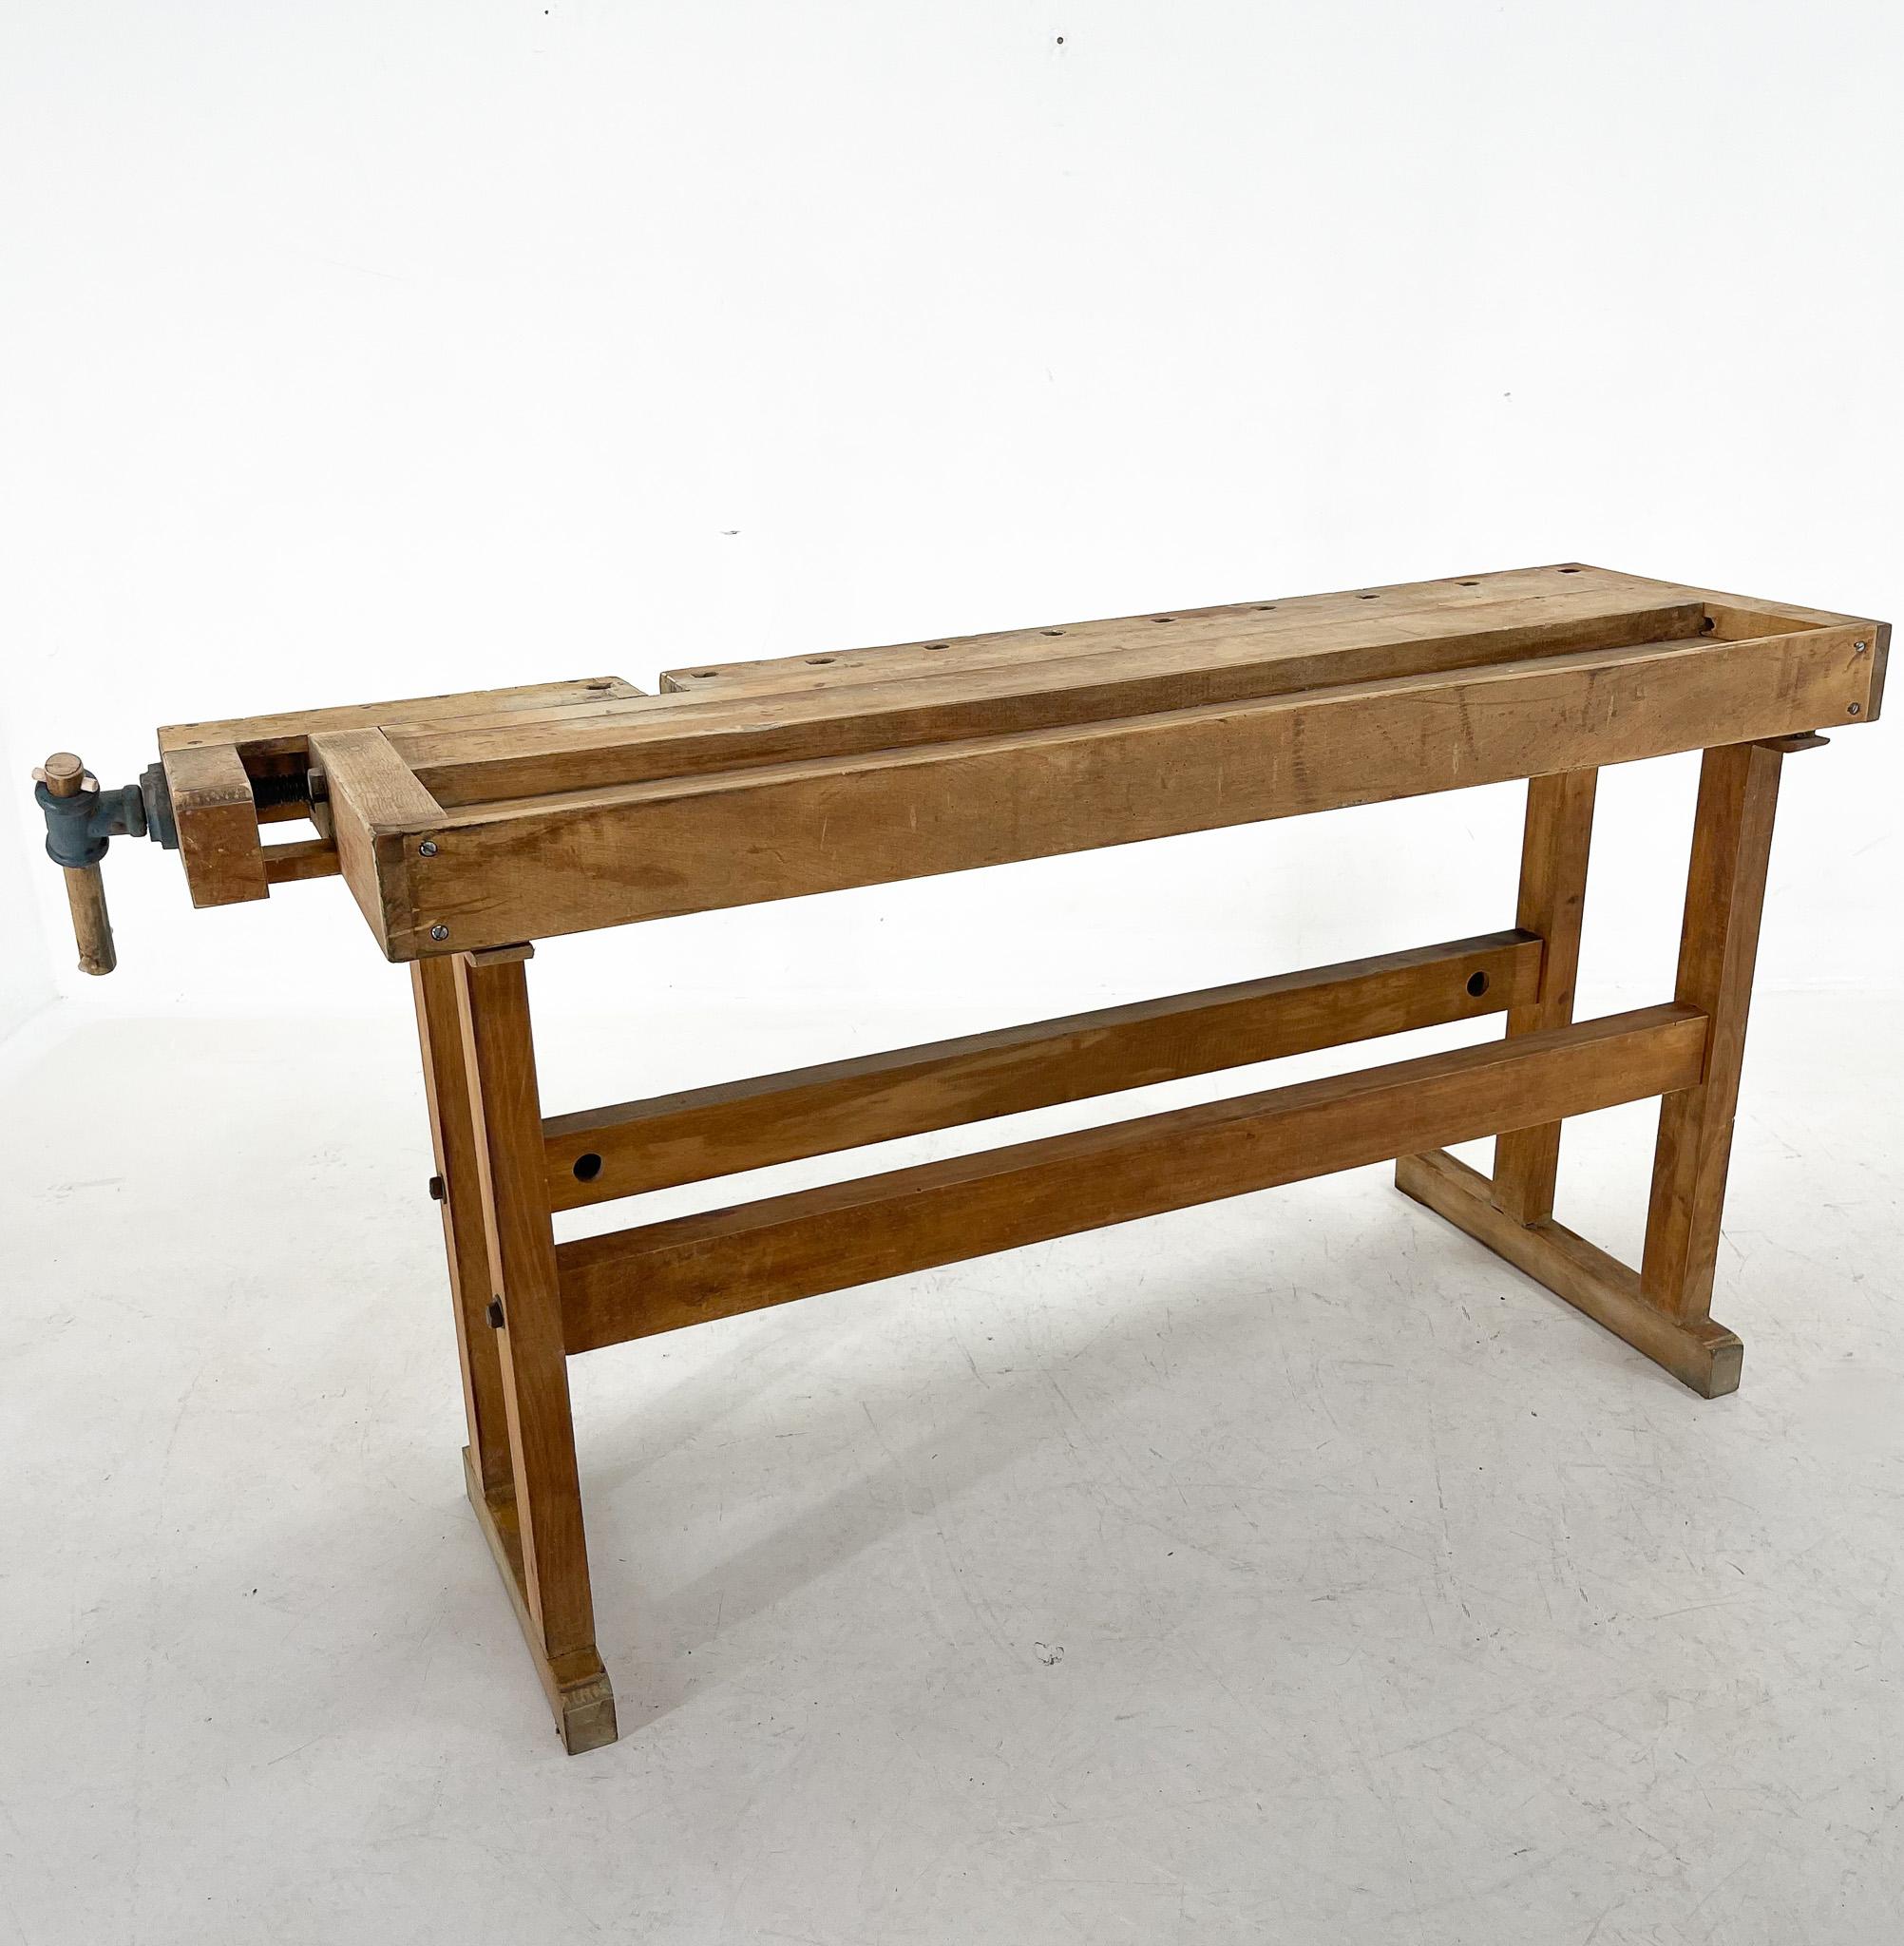 Carpenters workbench, two built-in wooden vices screws. Produced in former Czechoslovakia in 1950's by Hikor Pisek. Can be used as a side table, sideboard, serving table or console. All parts are original, only two pegs in the vise have been